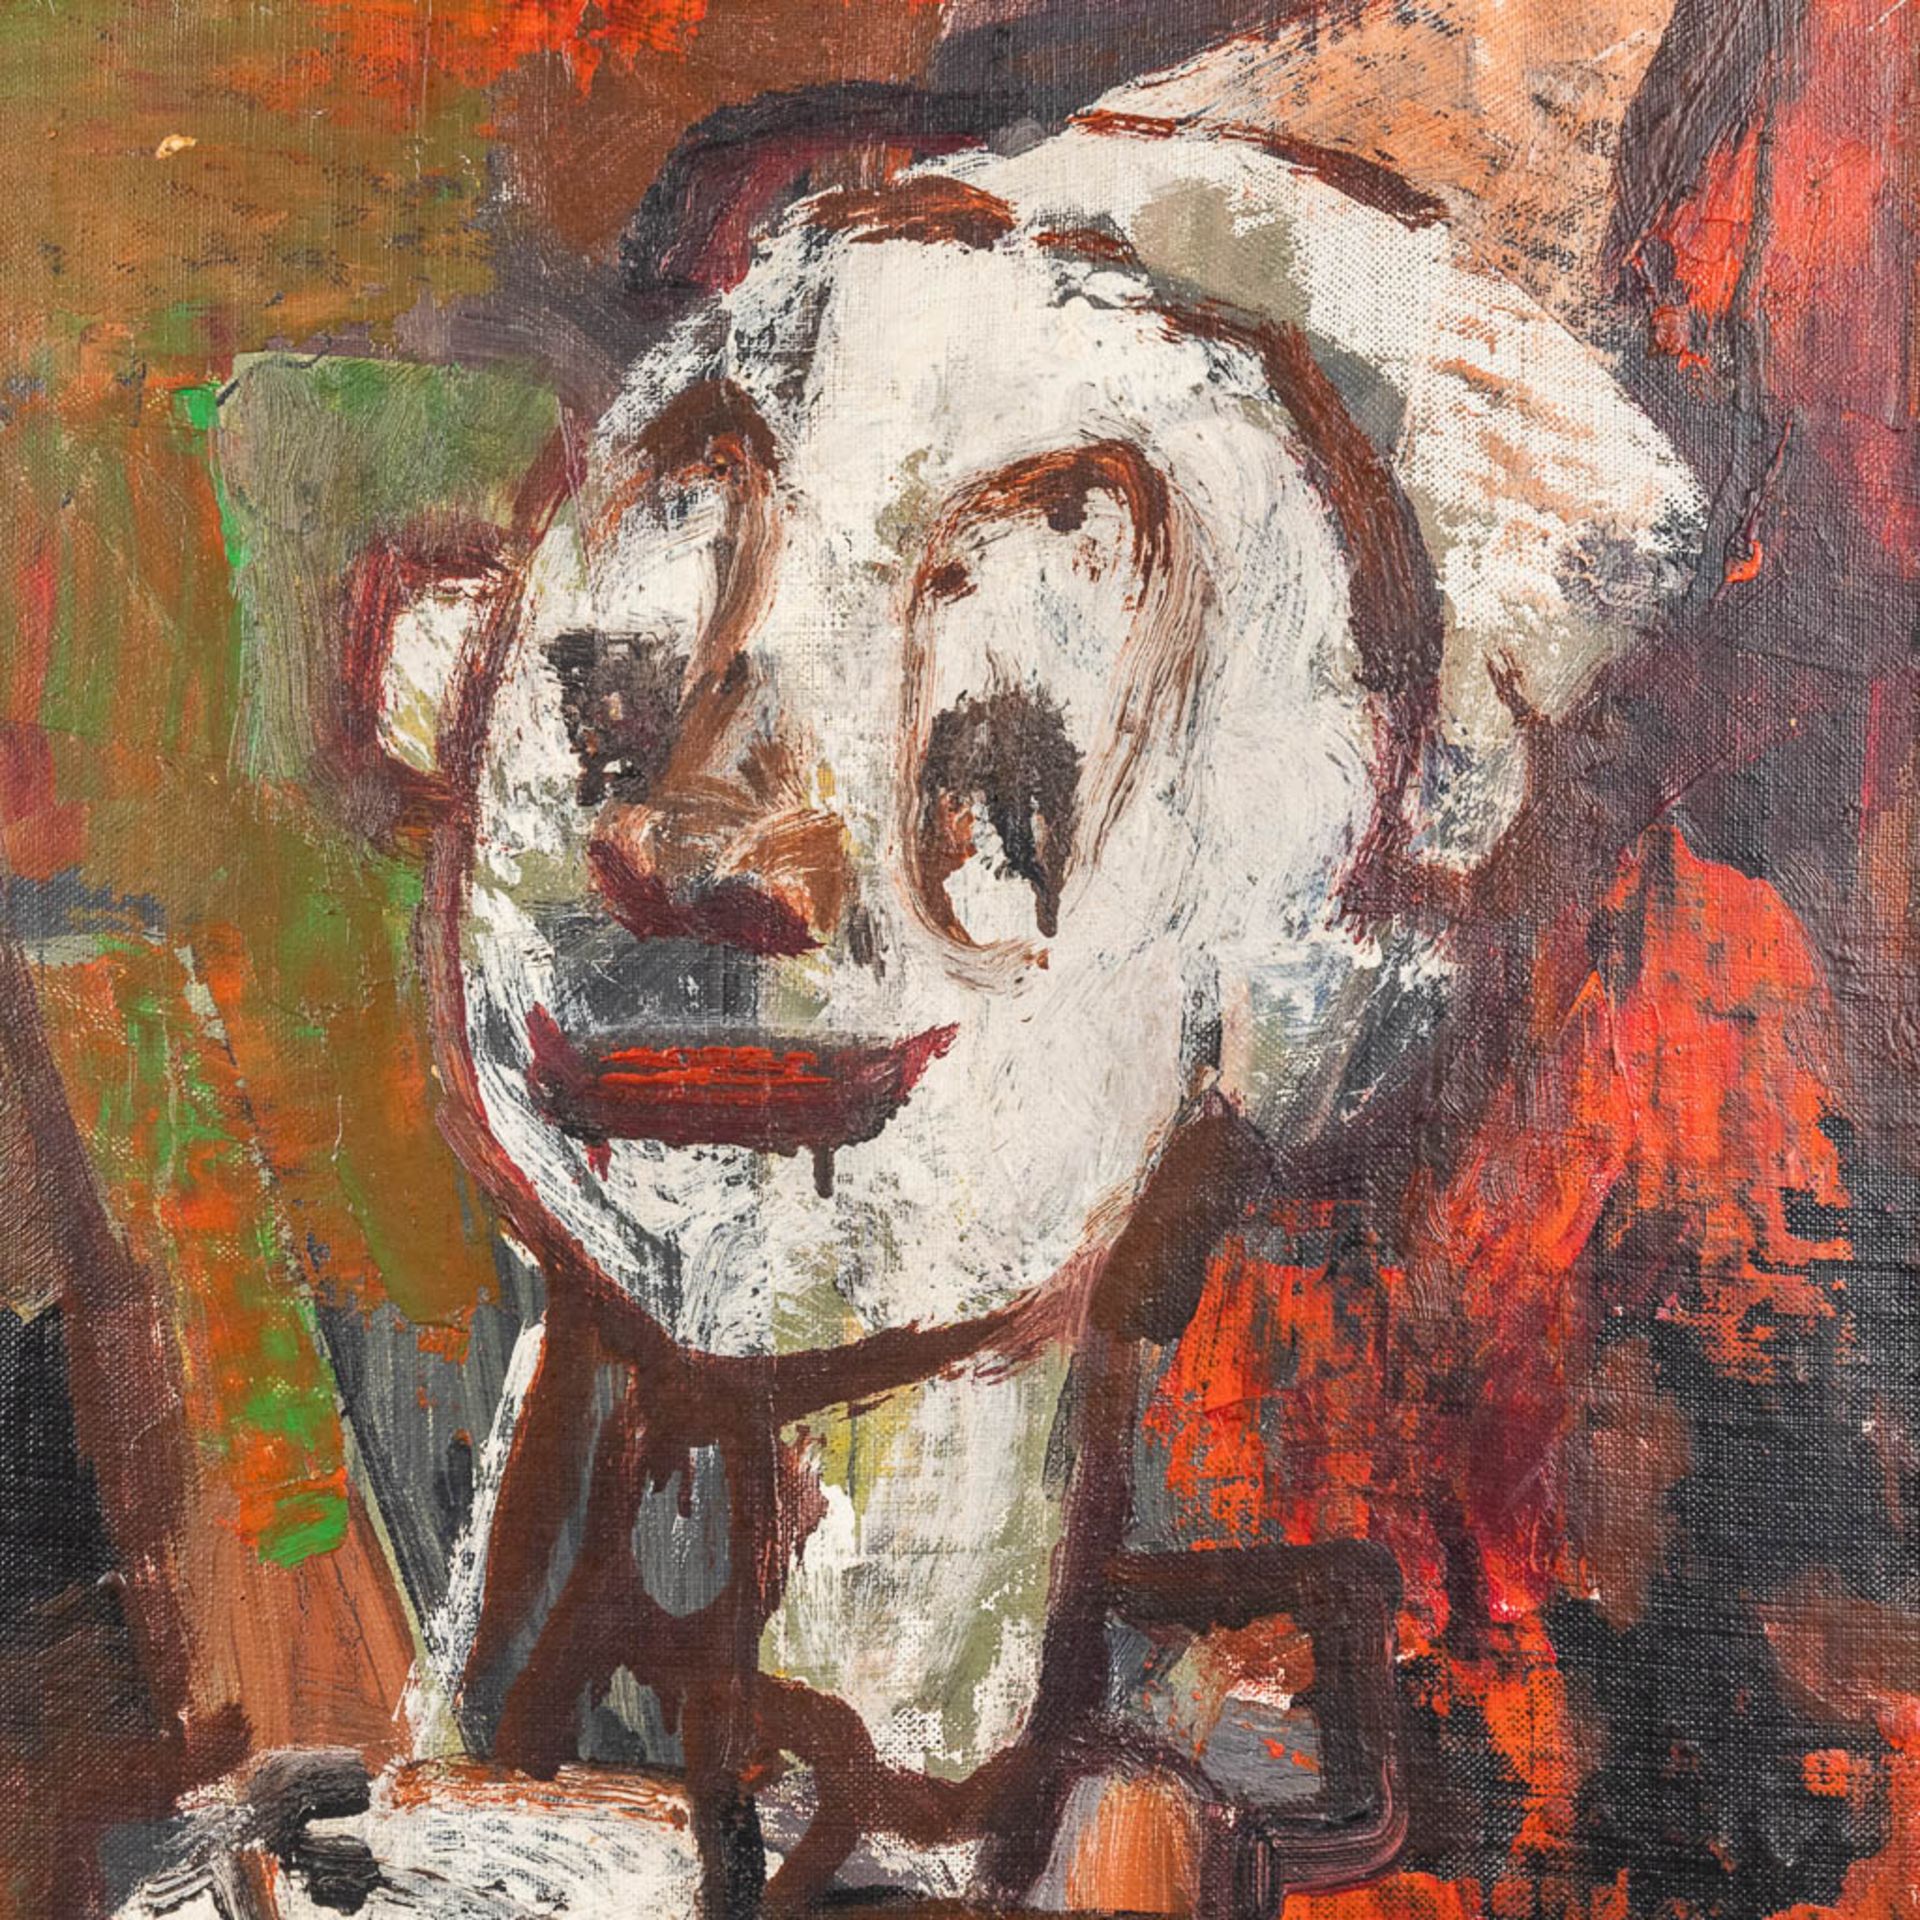 Constant LAMBRECHT (1915-1993) 'Expressionist Clown' oil on board. (W: 40 x H: 110 cm) - Image 4 of 7